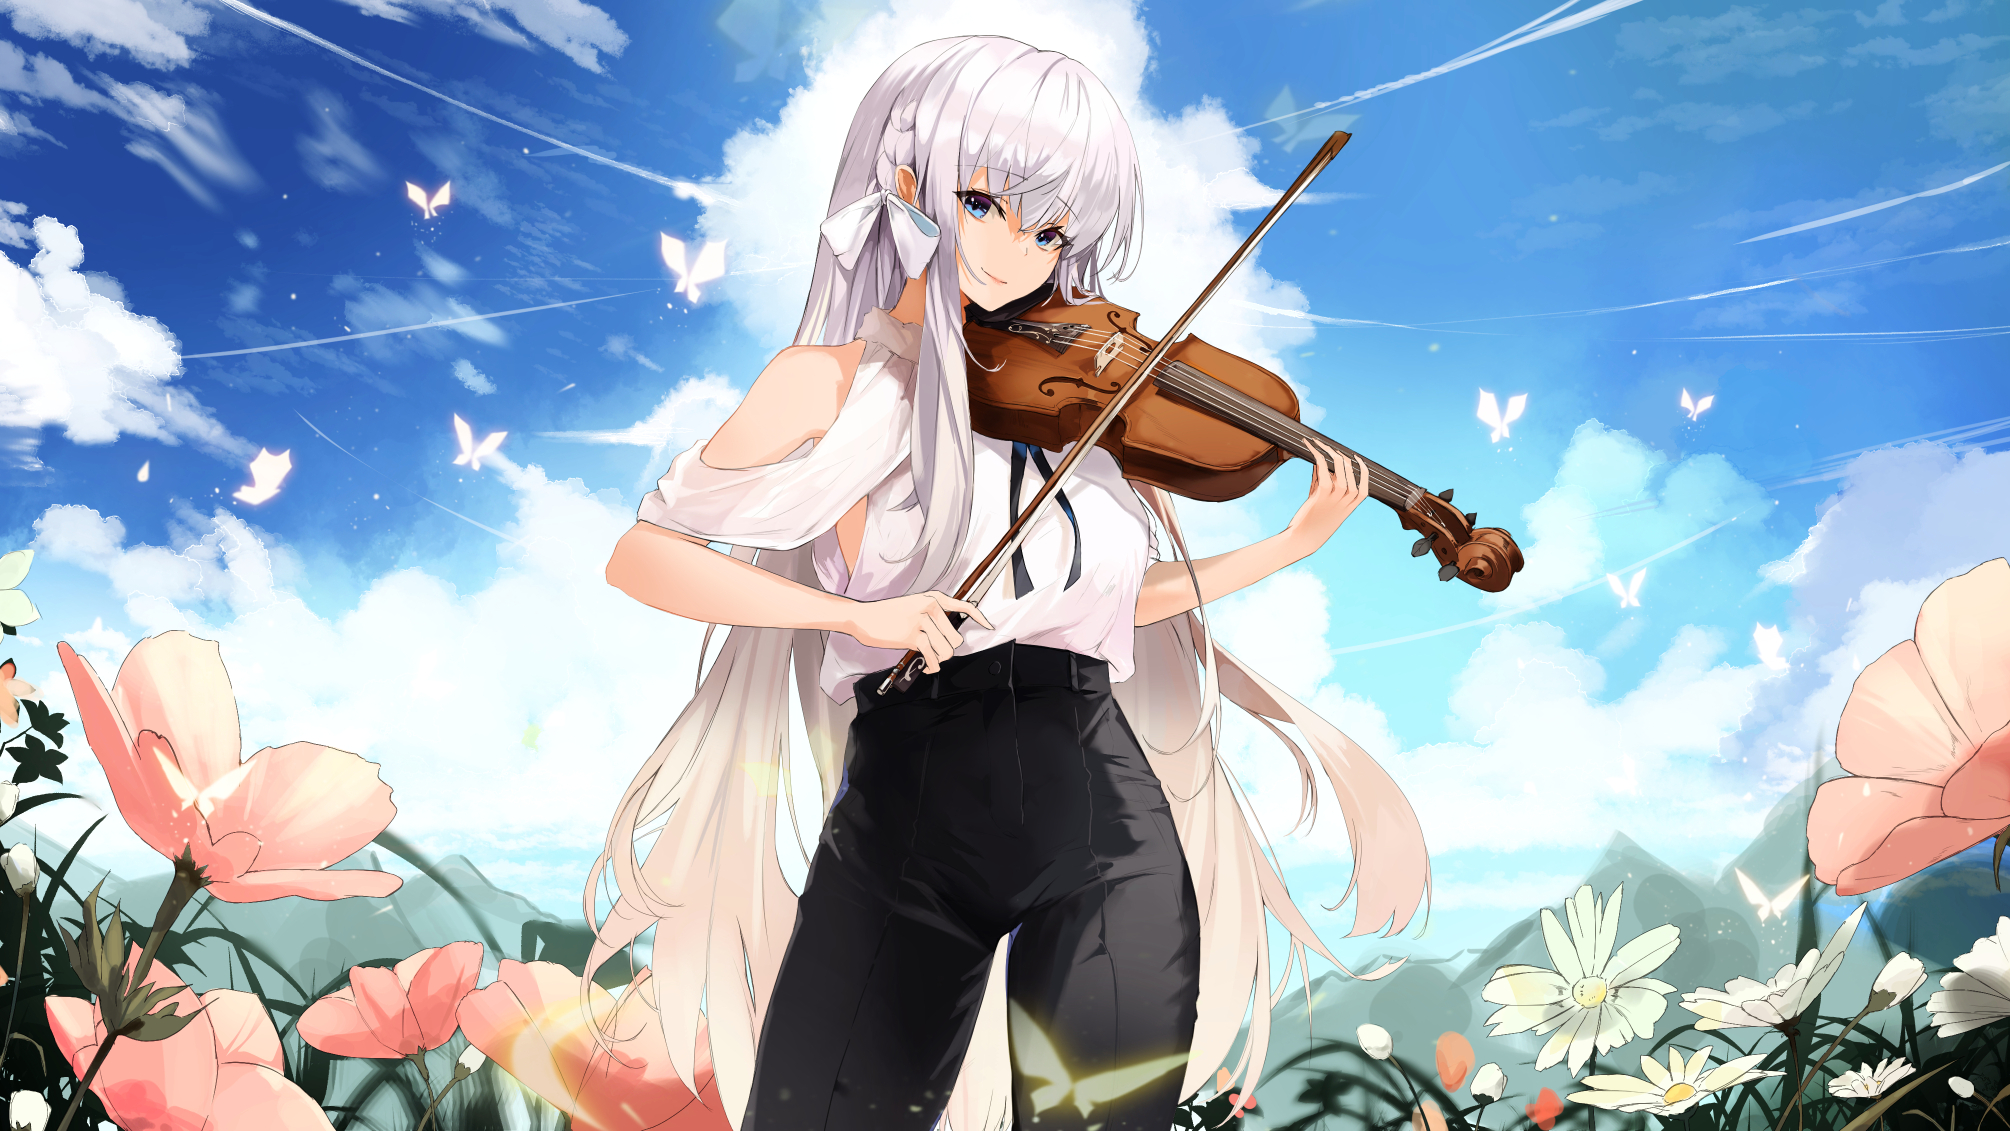 Anime Violin Artwork| Buy High-Quality Posters and Framed Posters Online -  All in One Place – PosterGully